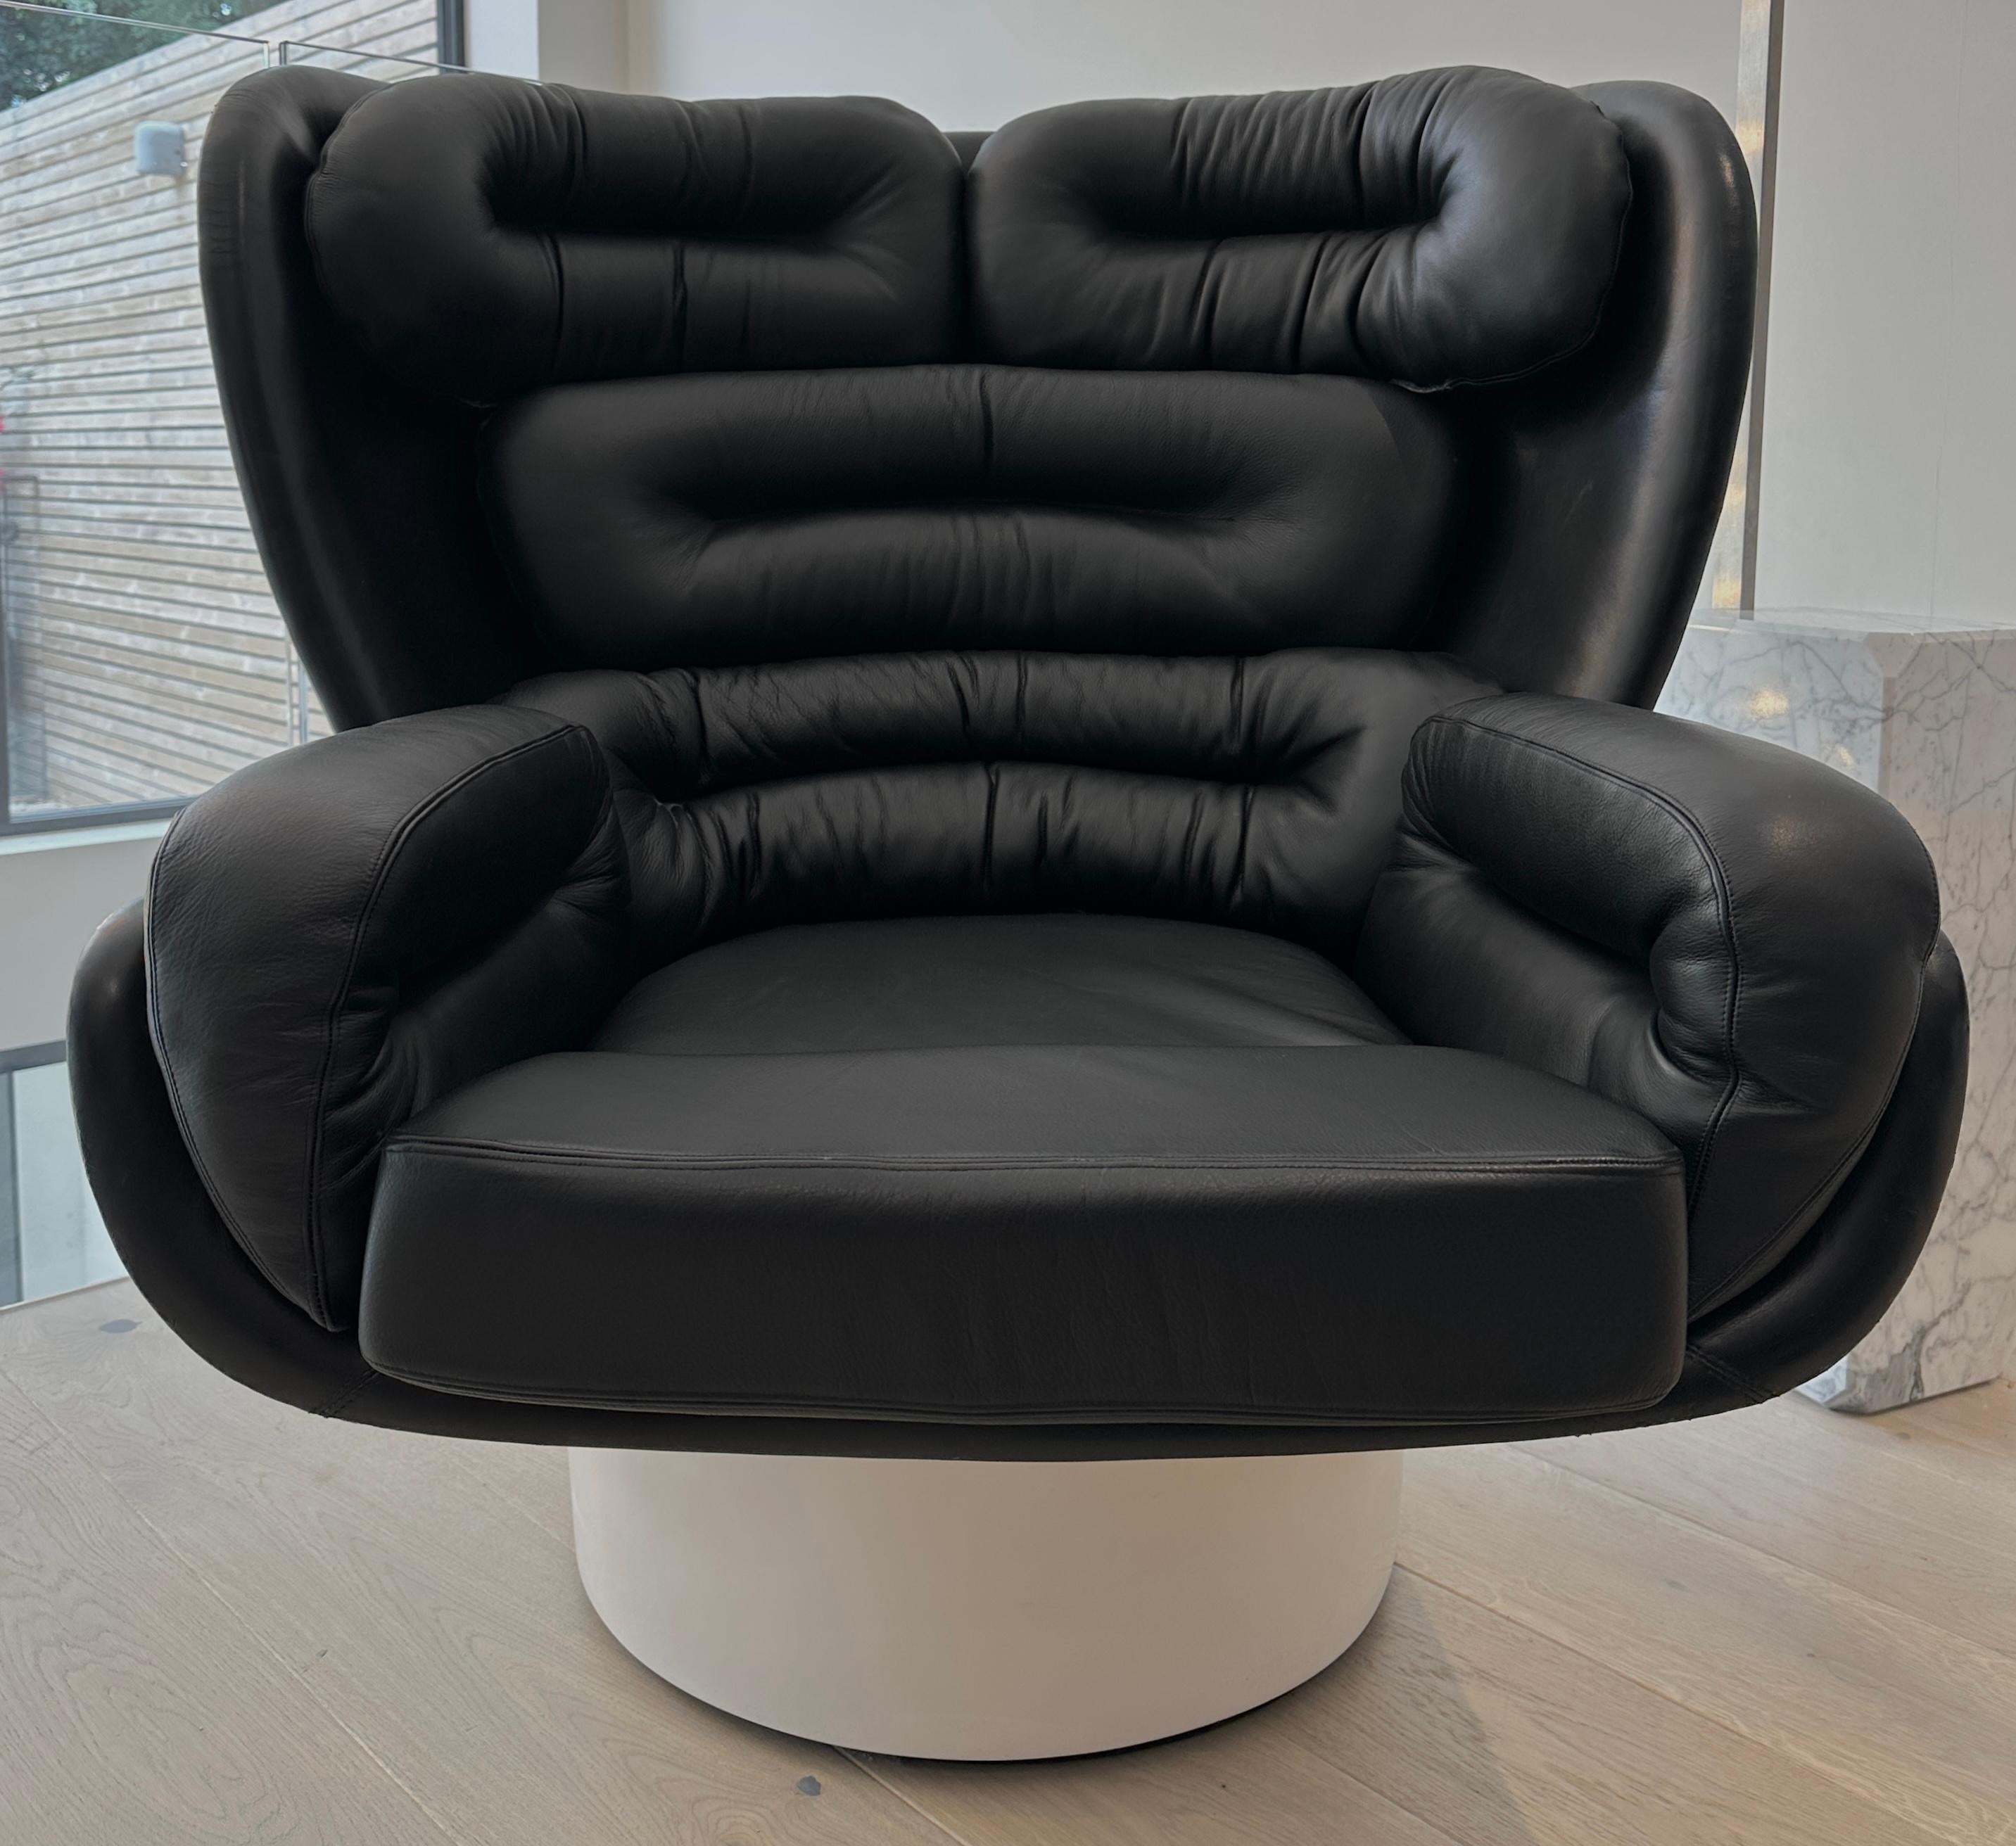 I have a pair of this iconic chairs but both listed separately. 1960s Italian 'Elda' swivel lounge chair designed by Joe Colombo in 1963 (1930-1971 ) and manufactured by Comfort Italy. This is one of the most well-known, space-age and futuristic